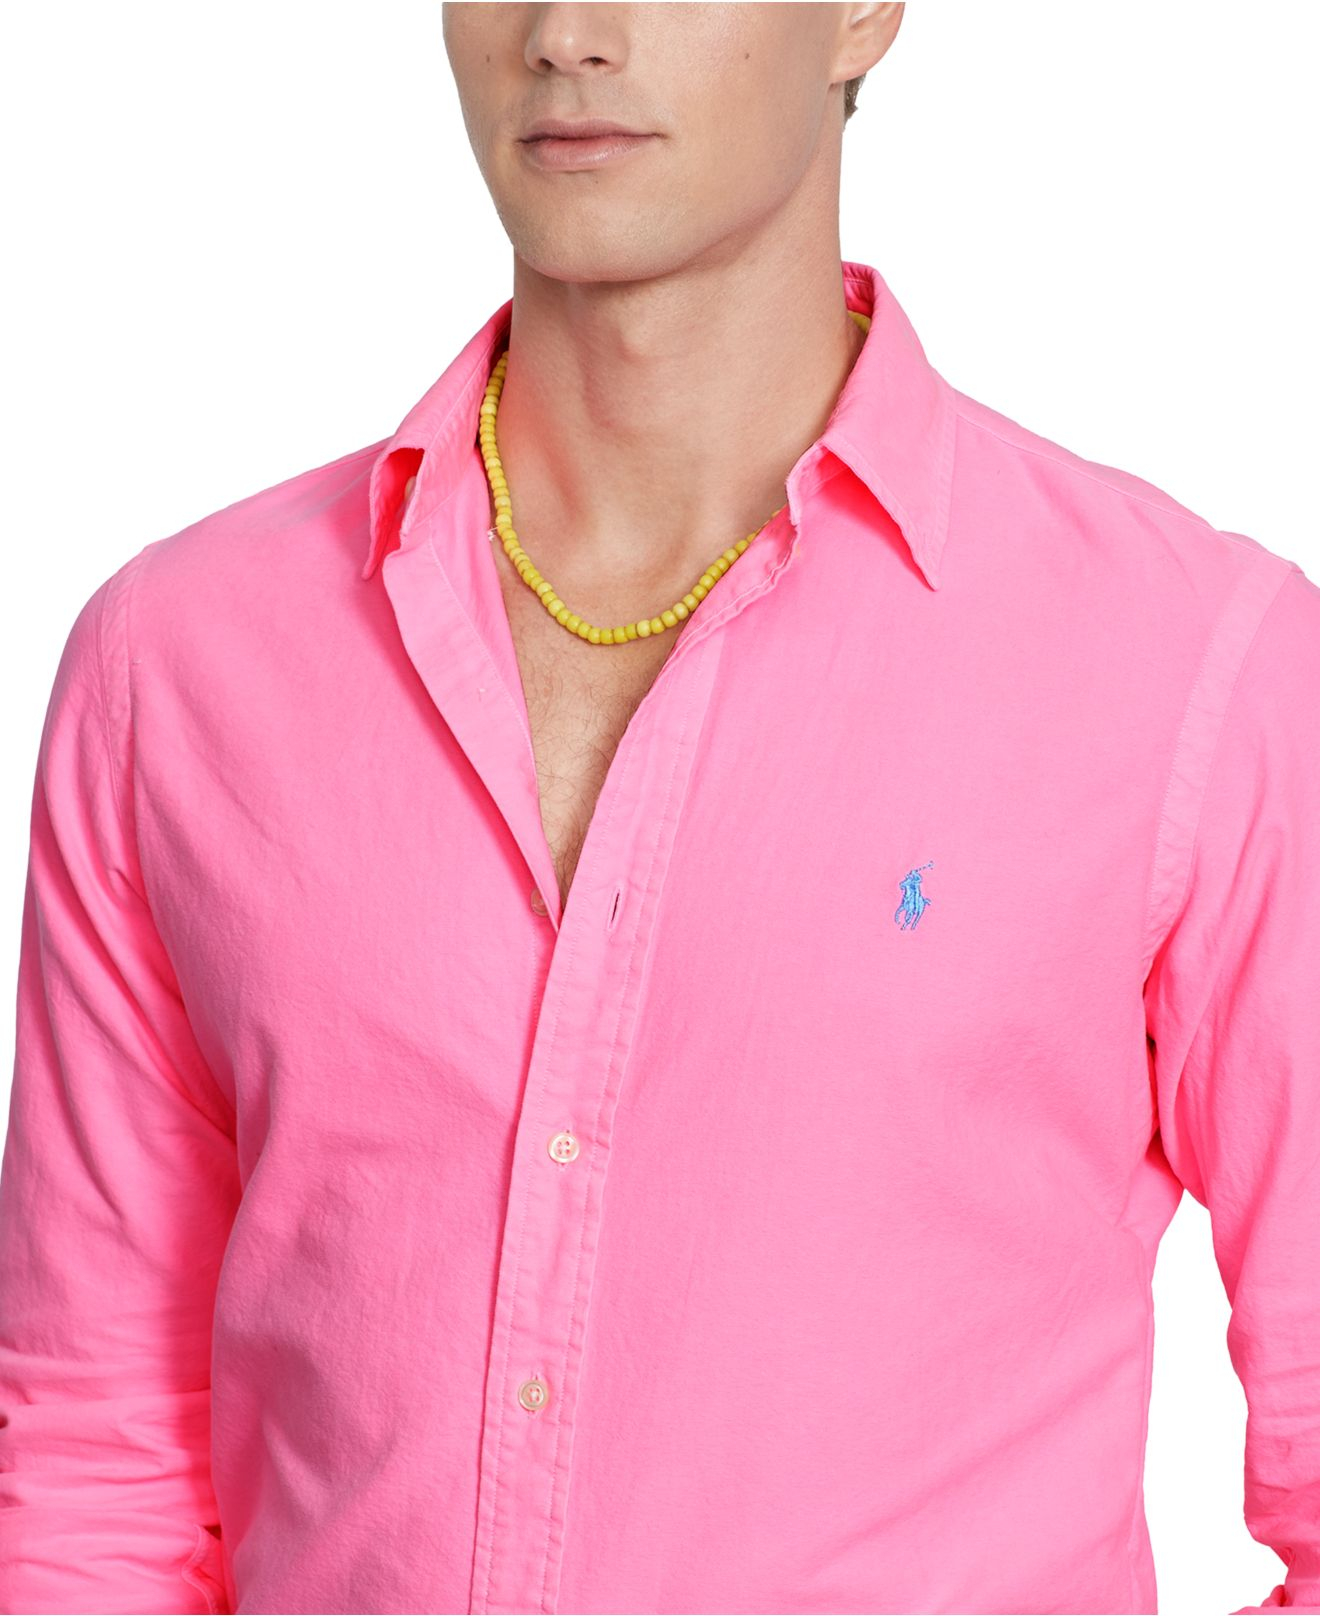 Polo Ralph Lauren Solid Oxford Shirt in Electric Pink (Pink) for Men - Lyst